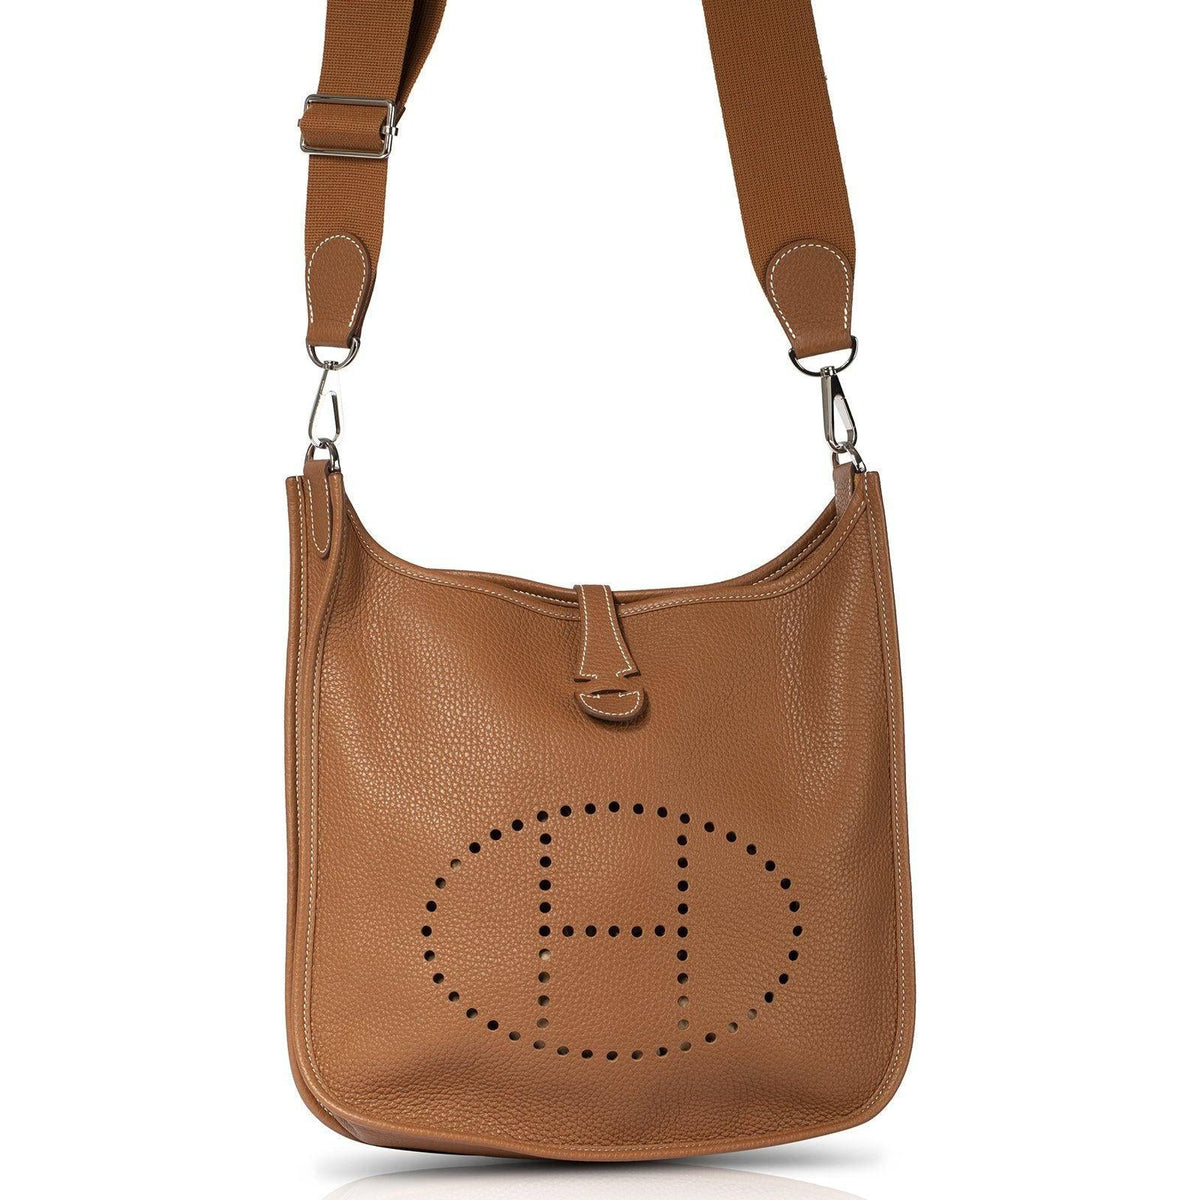 Purchase Our Hermes Evelyne III 29 Bag Hermes X and get the Best Deal